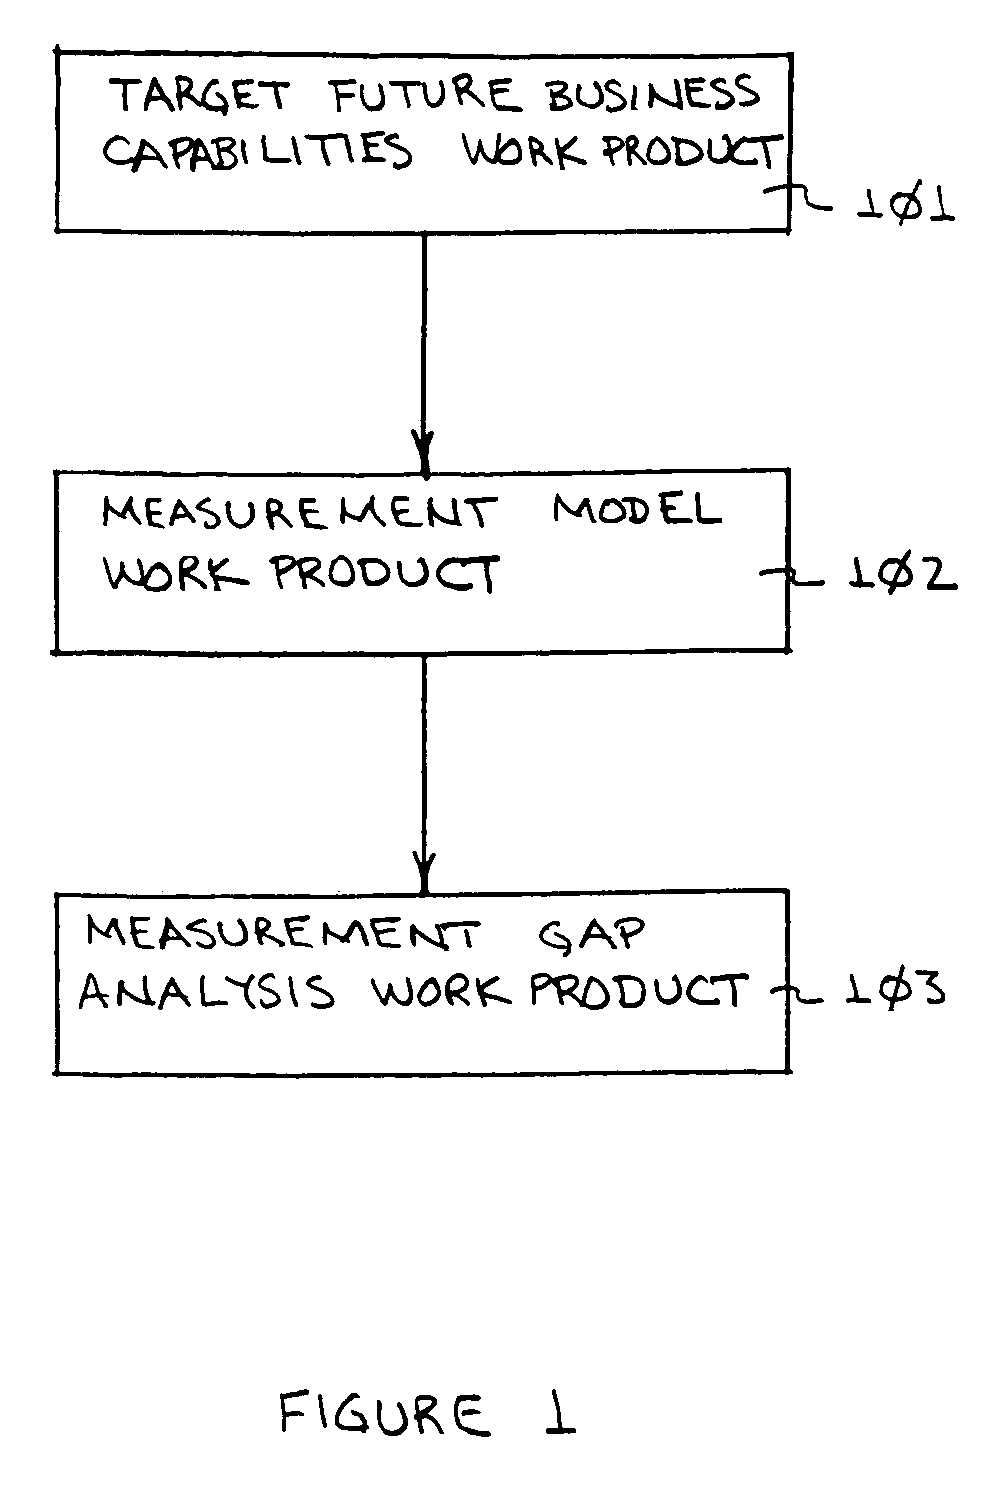 System and method for measuring and managing performance in an information technology organization